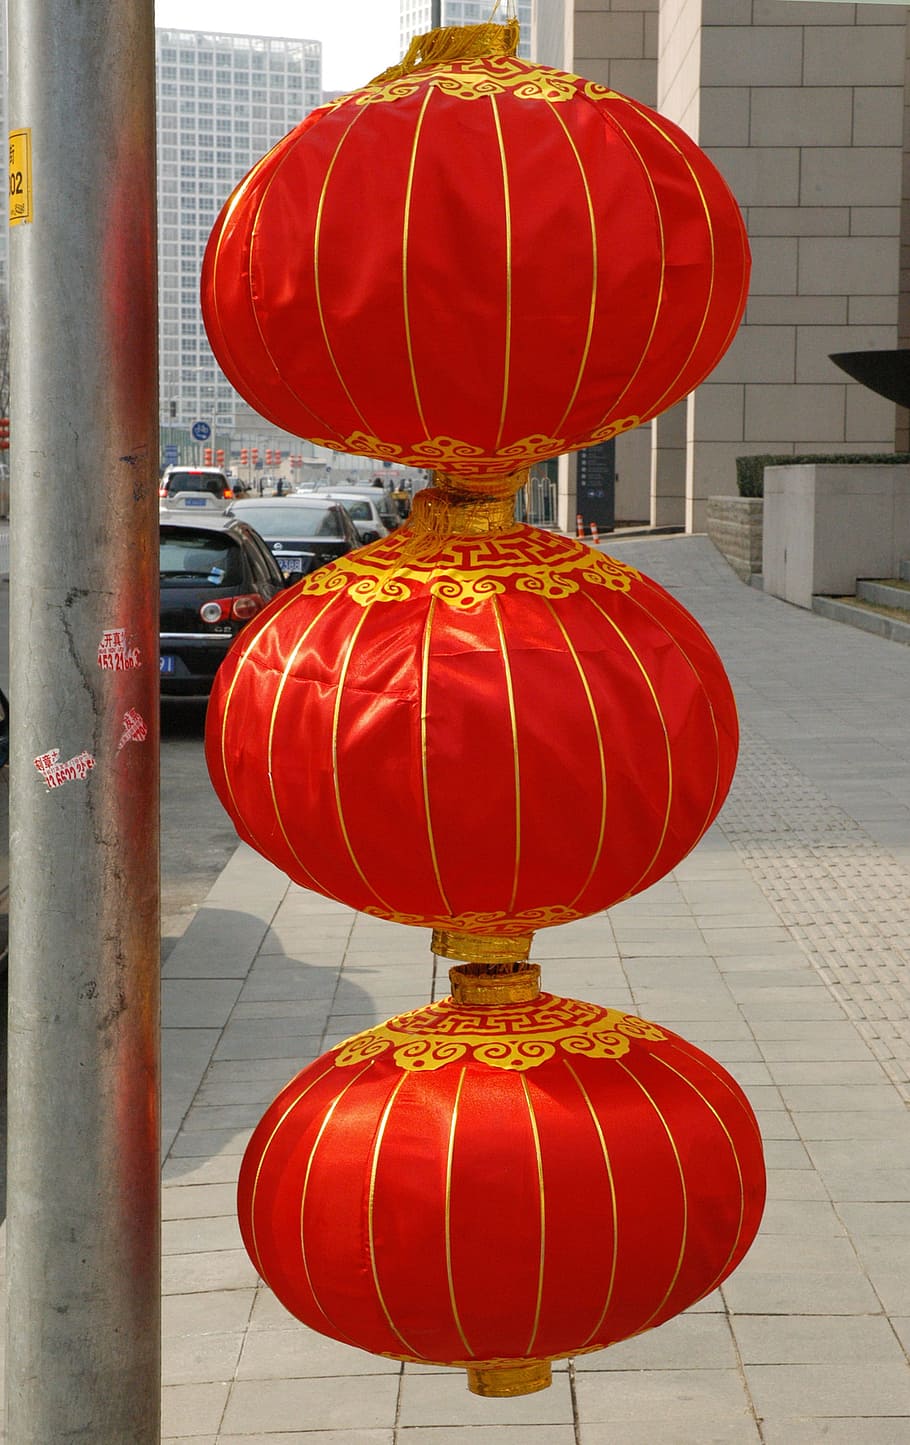 Chinese, Lantern, China, Culture, chinese, lantern, festival, traditional, asian, oriental, decoration